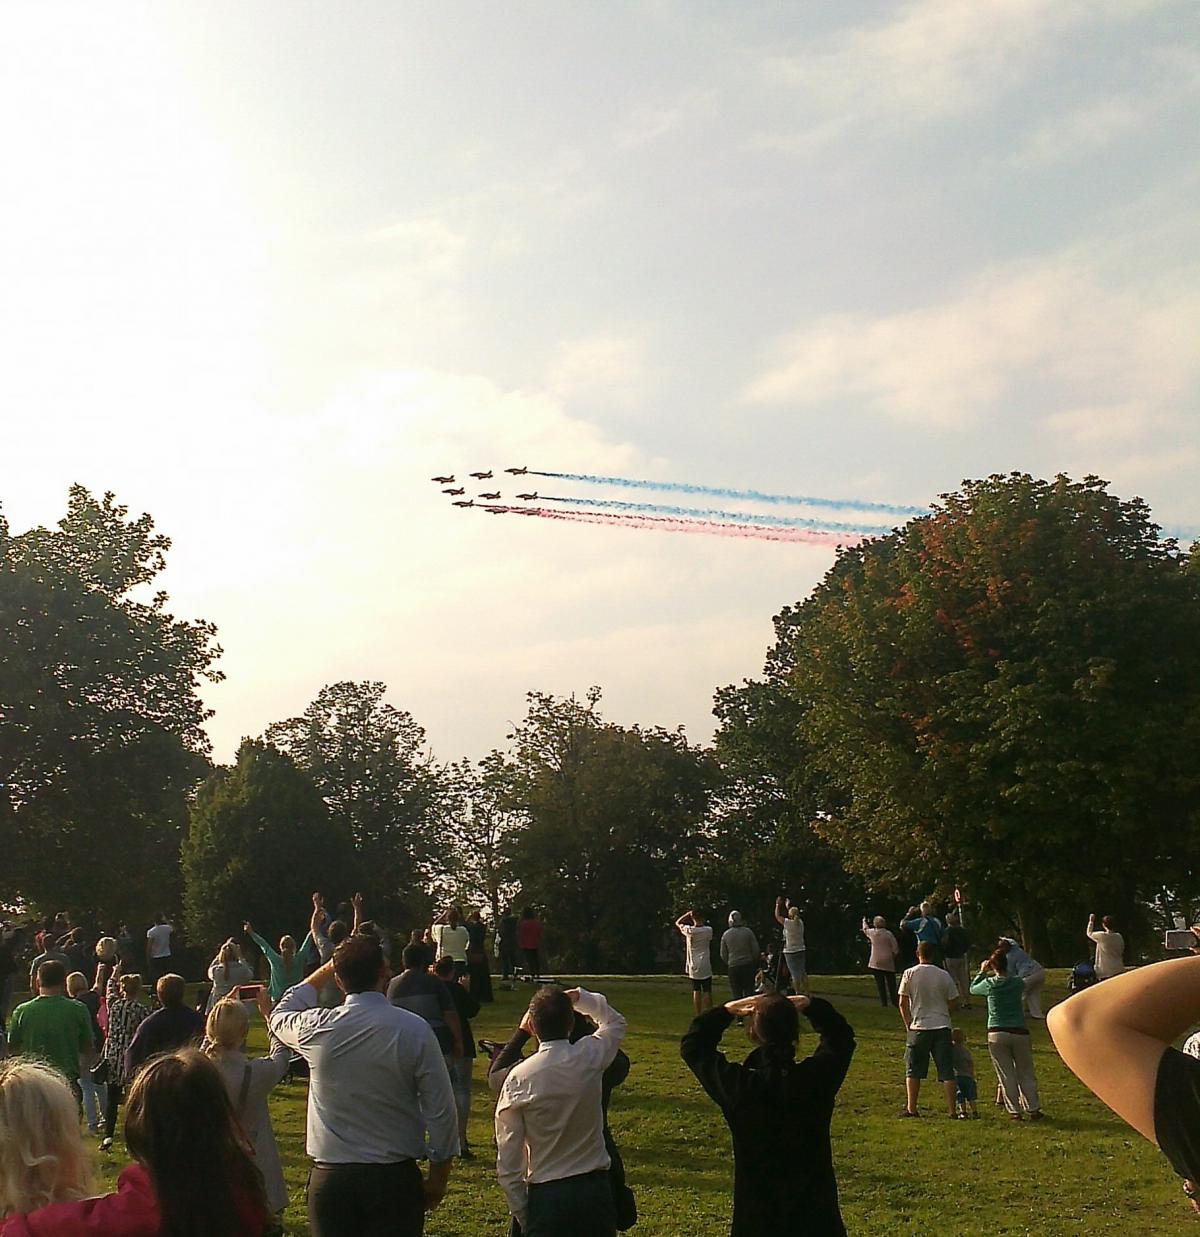 David Wilkie took this great shot of the Red Arrows from Beechwood Park.